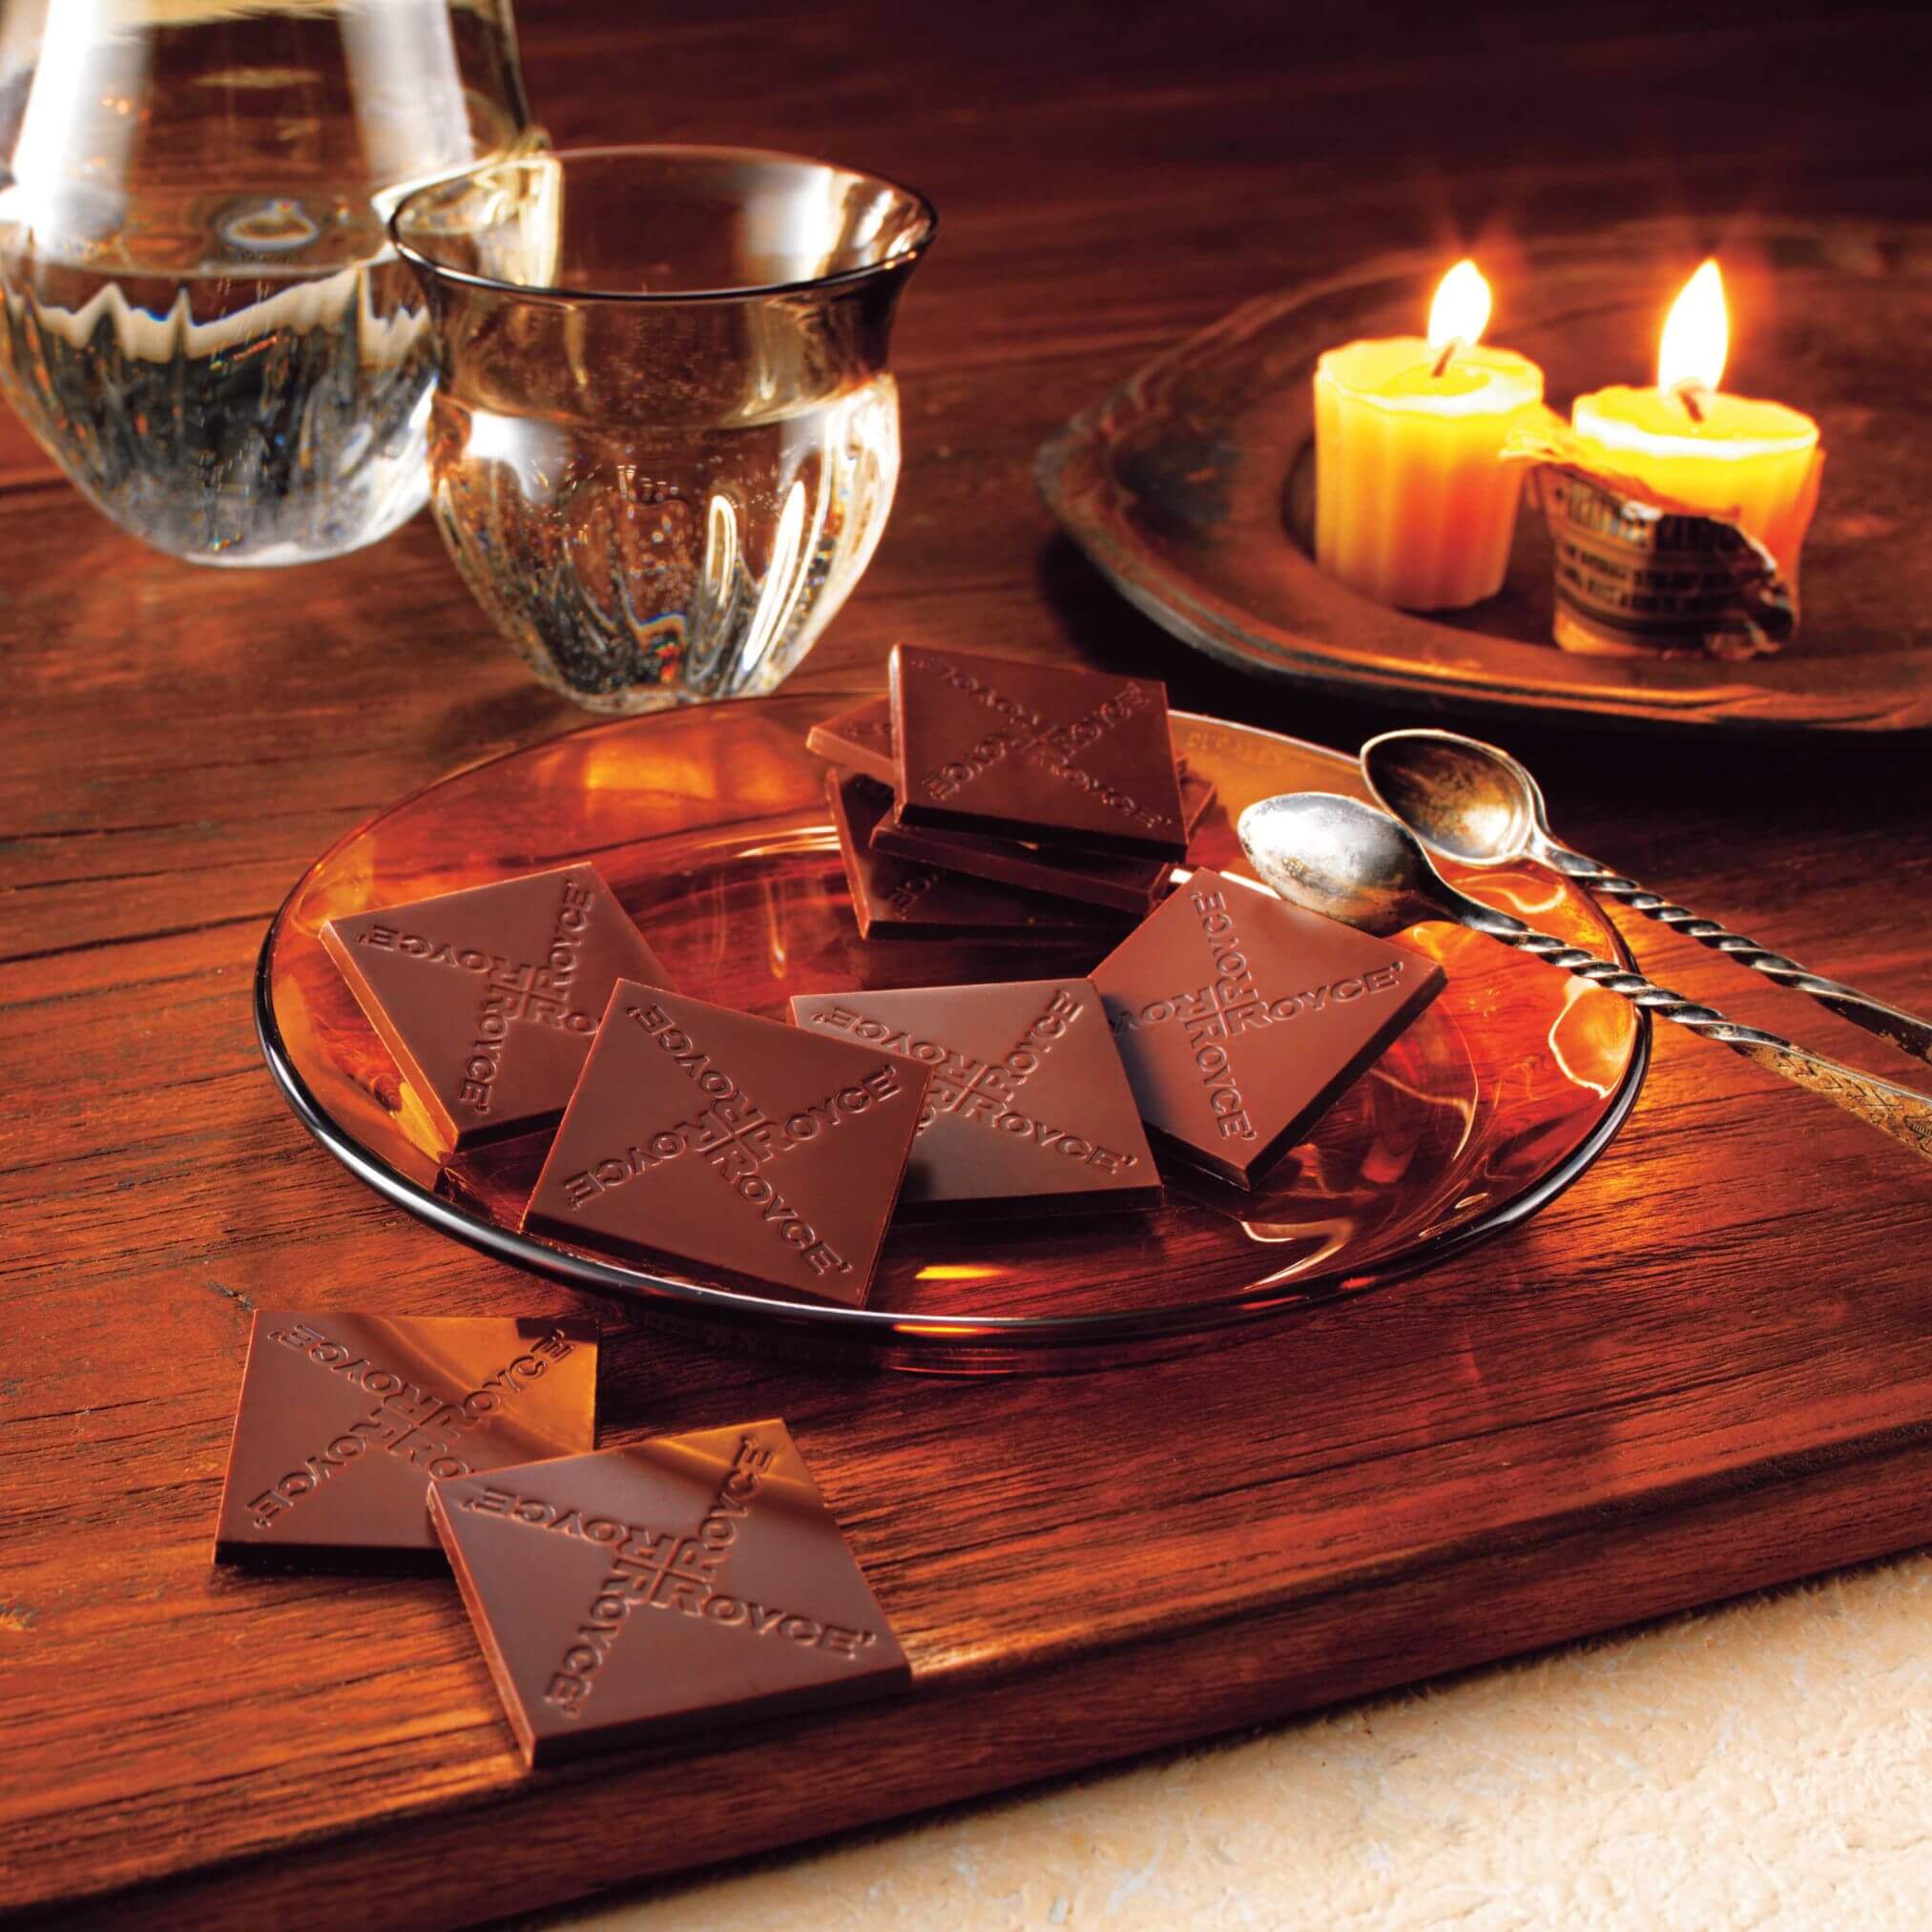 ROYCE' Chocolate - ROYCE' Origin Chocolate "Cacao 70%" - Image shows brown chocolate squares on a plate with wooden platform. Accents include glasses and candles.